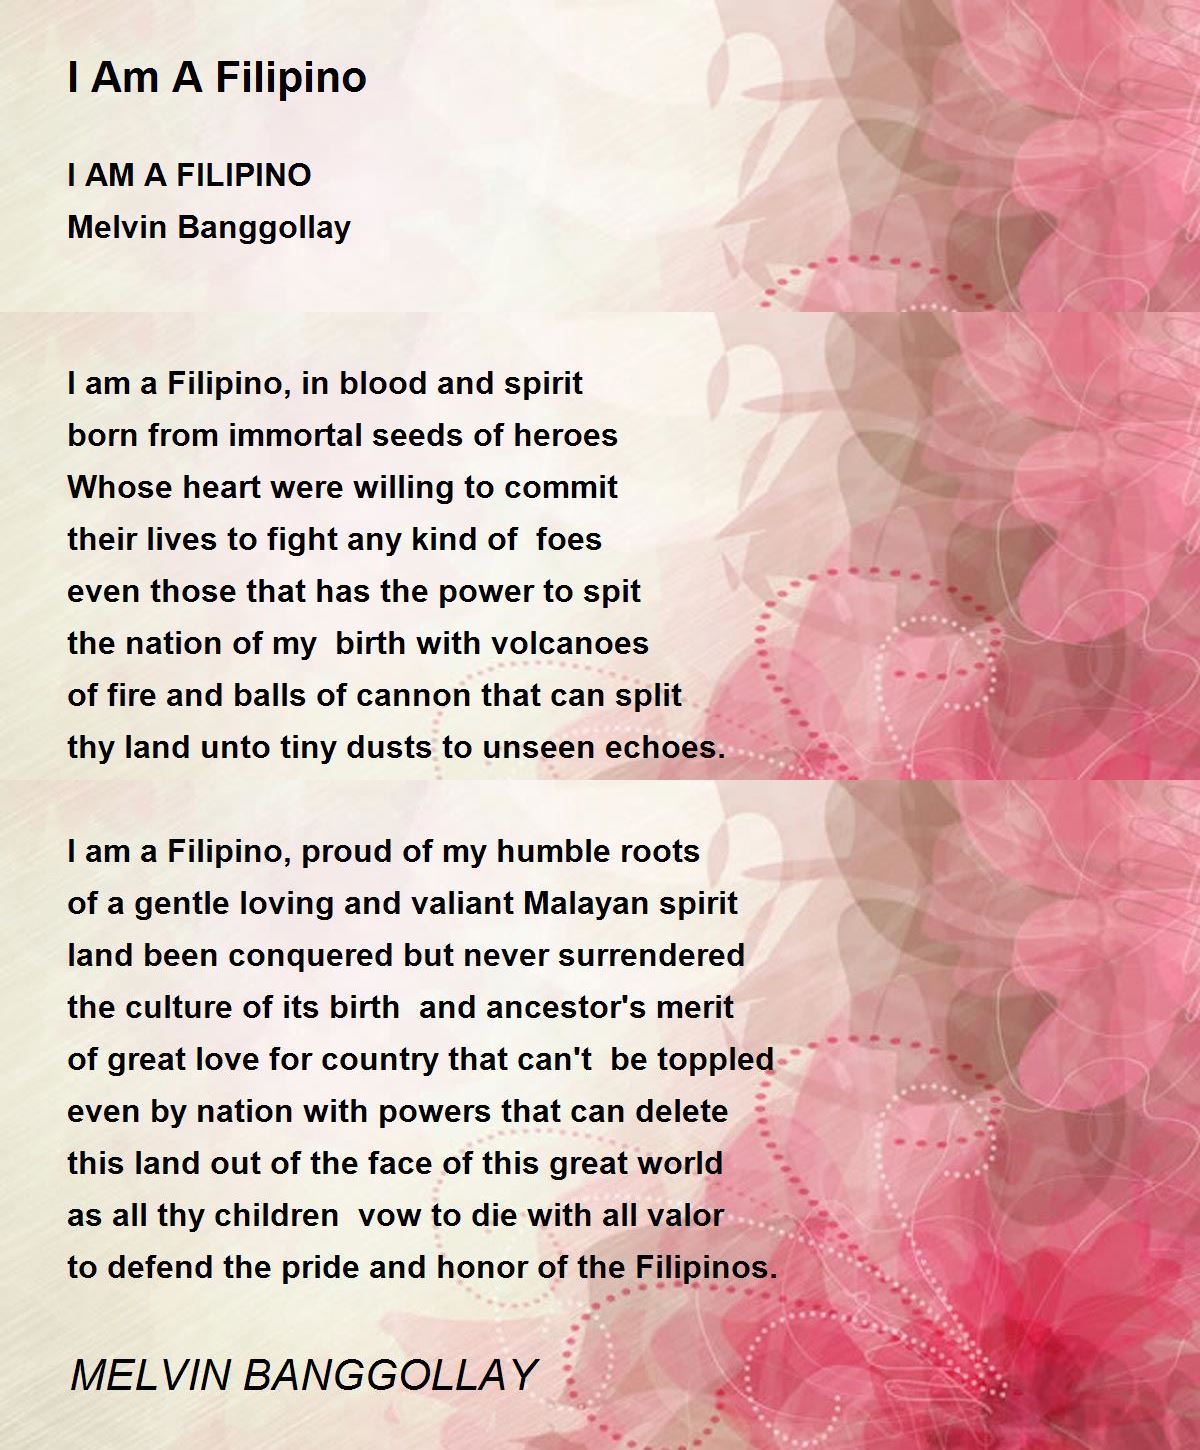 4 Ways Colonialism Affects the Everyday Lives of Filipino Americans